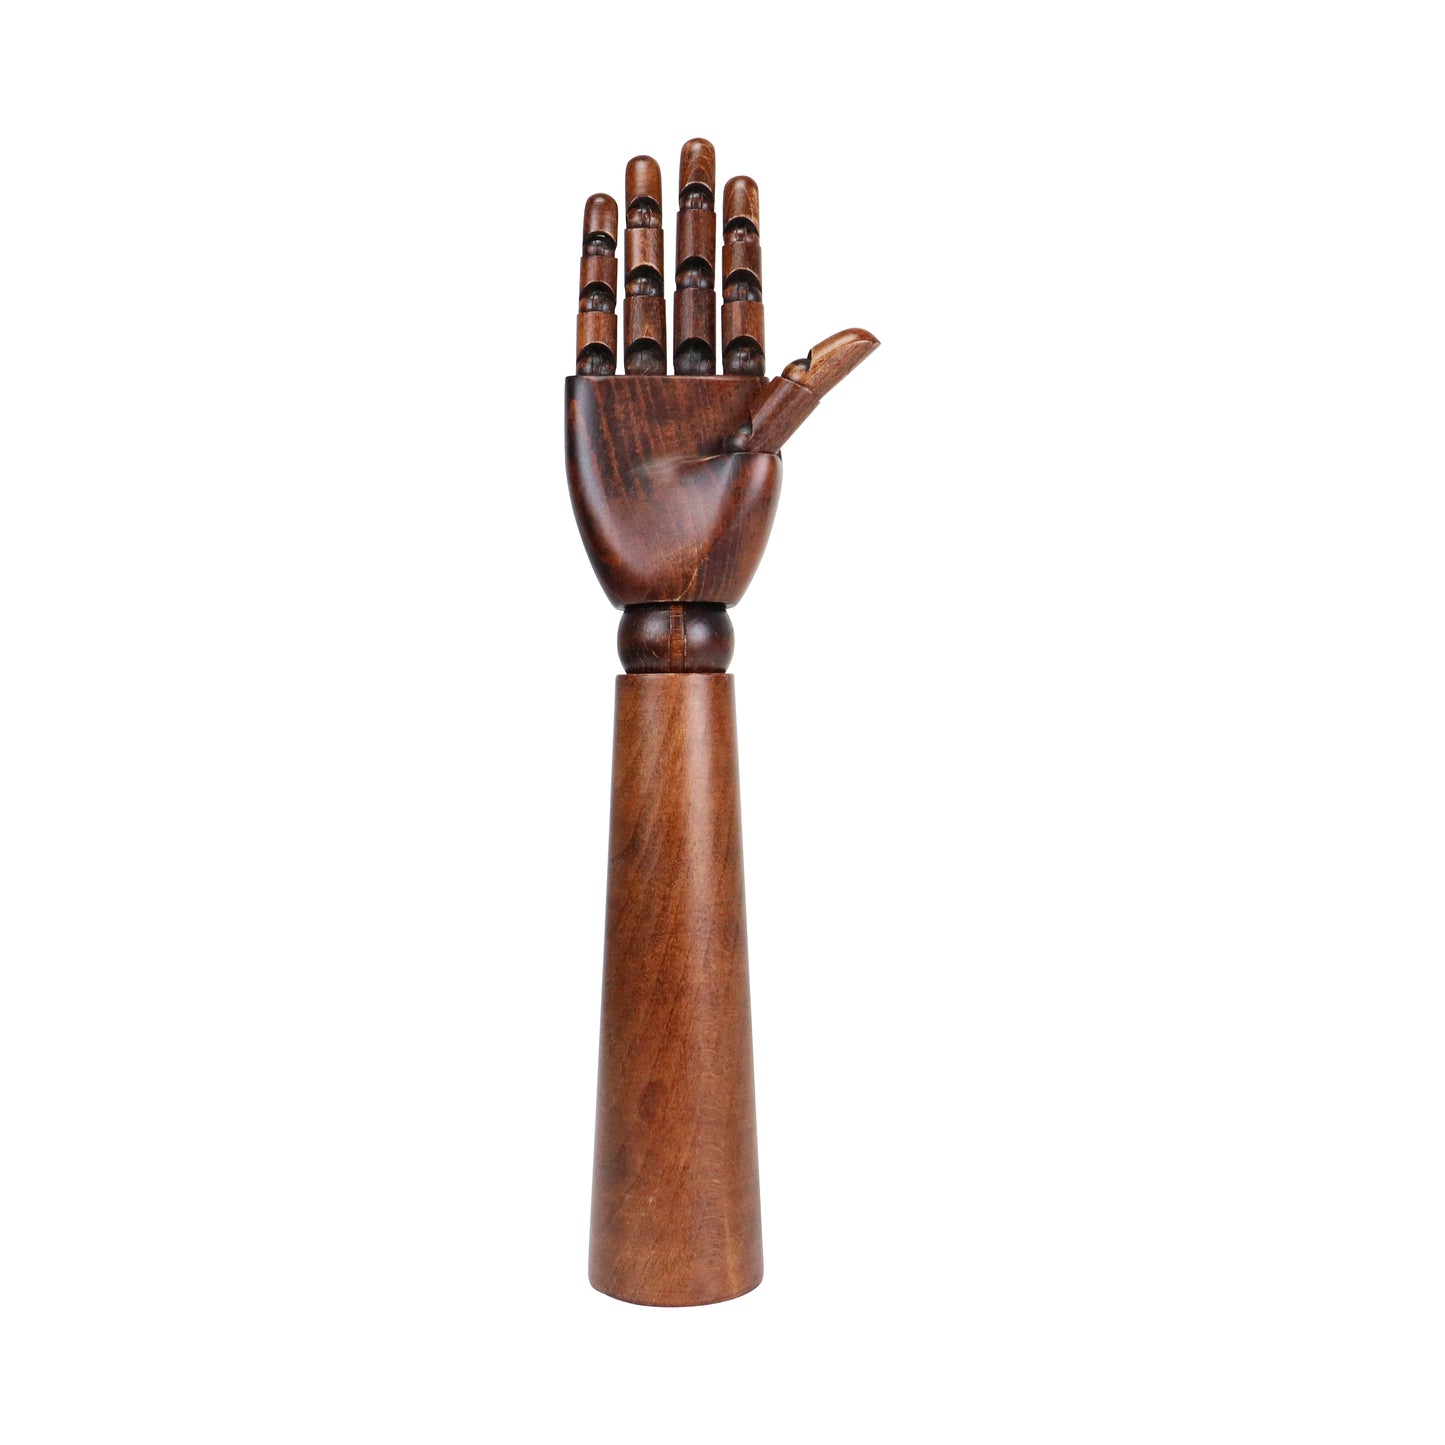 Jelimate Movable Wooden Hand Mannequin,High Quality Wood Mannequin Hand Display,Flexible Fingers Jewelry Display Props